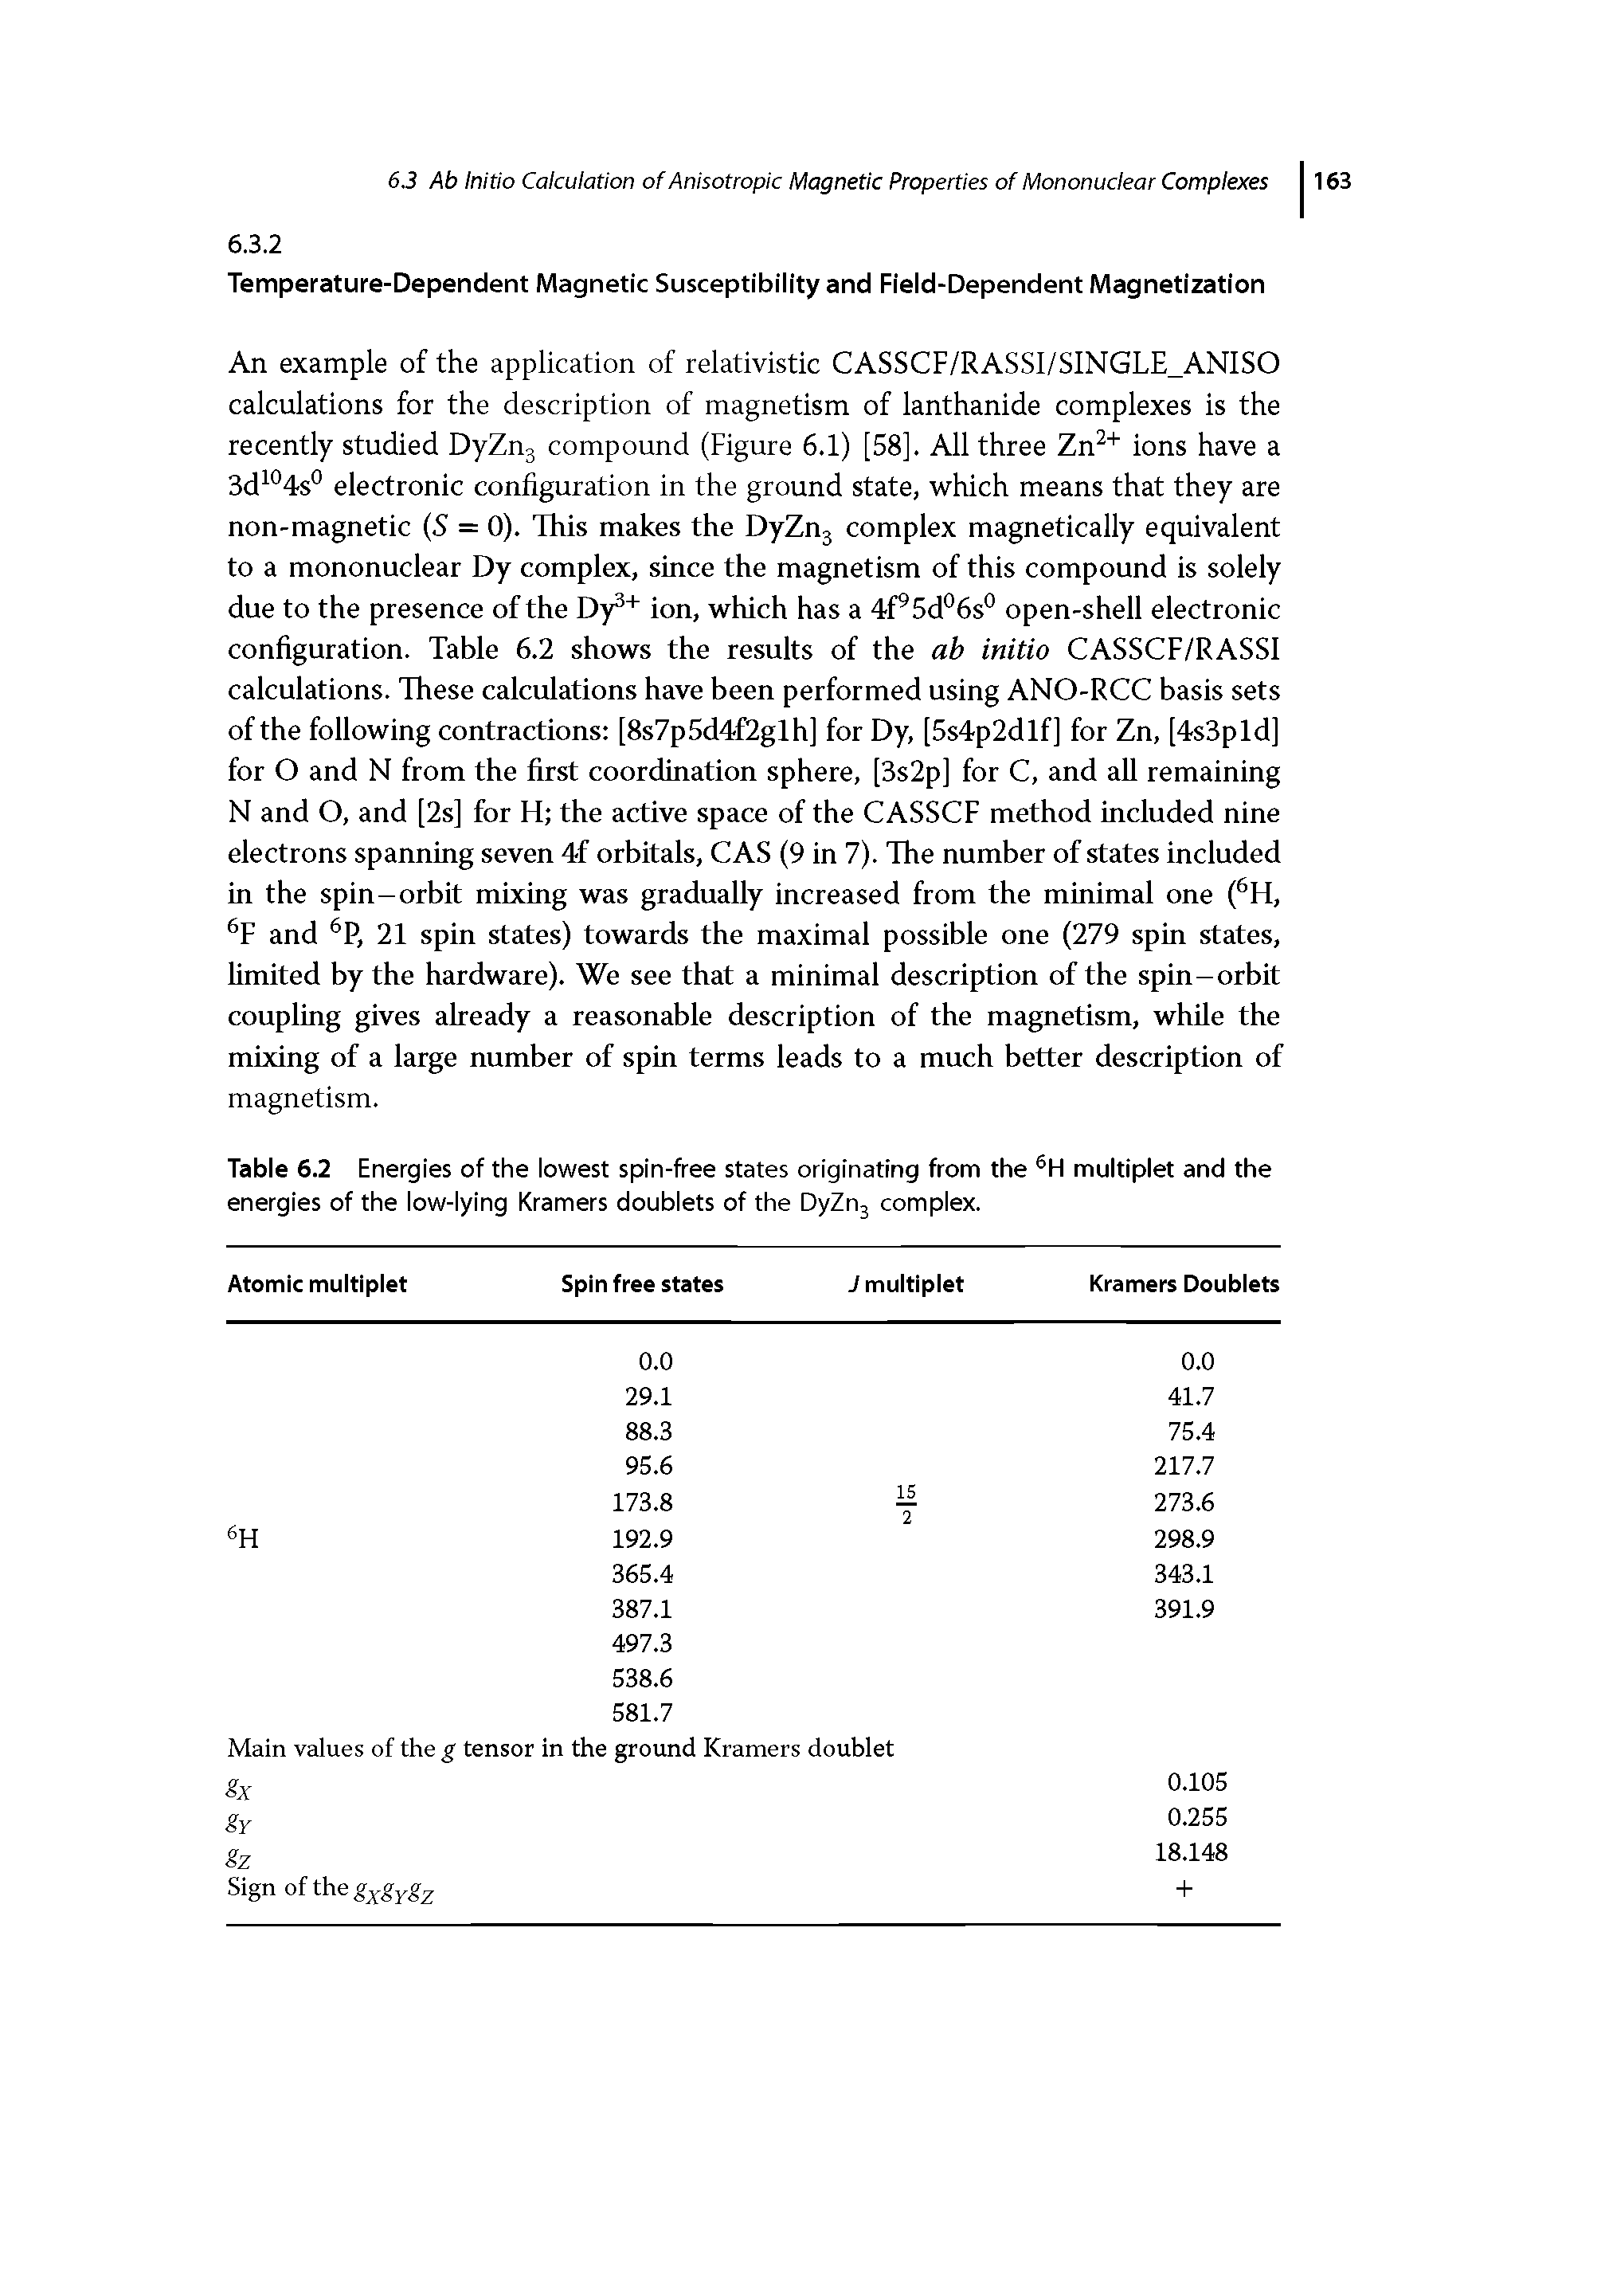 Table 6.2 Energies of the lowest spin-free states originating from the SH multiplet and the energies of the low-lying Kramers doublets of the DyZn3 complex.